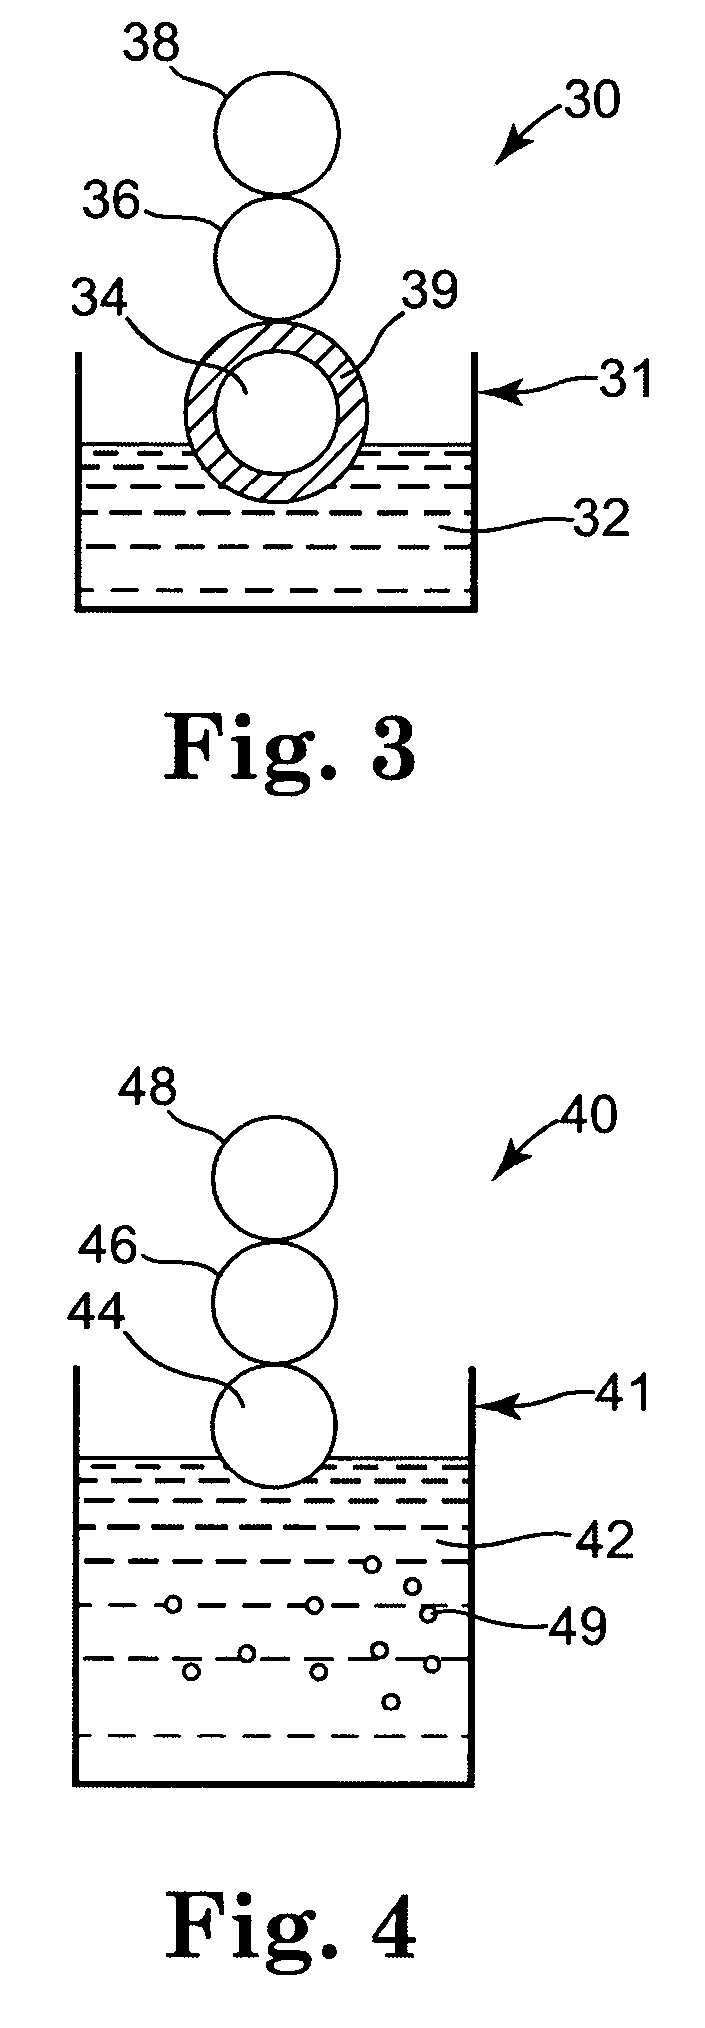 Charge adjuvant delivery system and methods